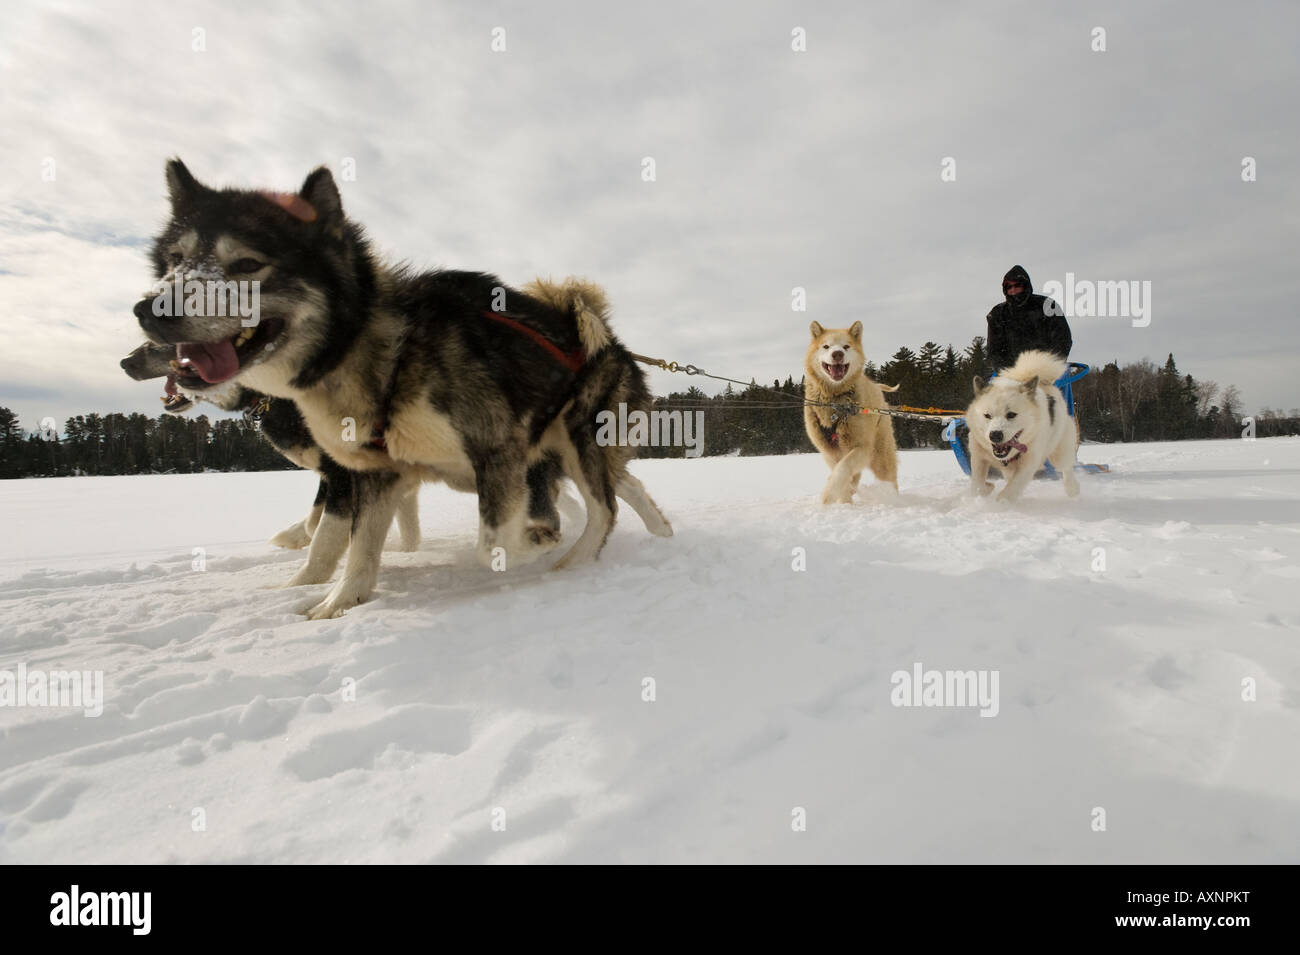 A TEAM OF SLED DOGS AND MUSHER BOUNDARY WATERS CANOE AREA MINNESOTA Stock Photo